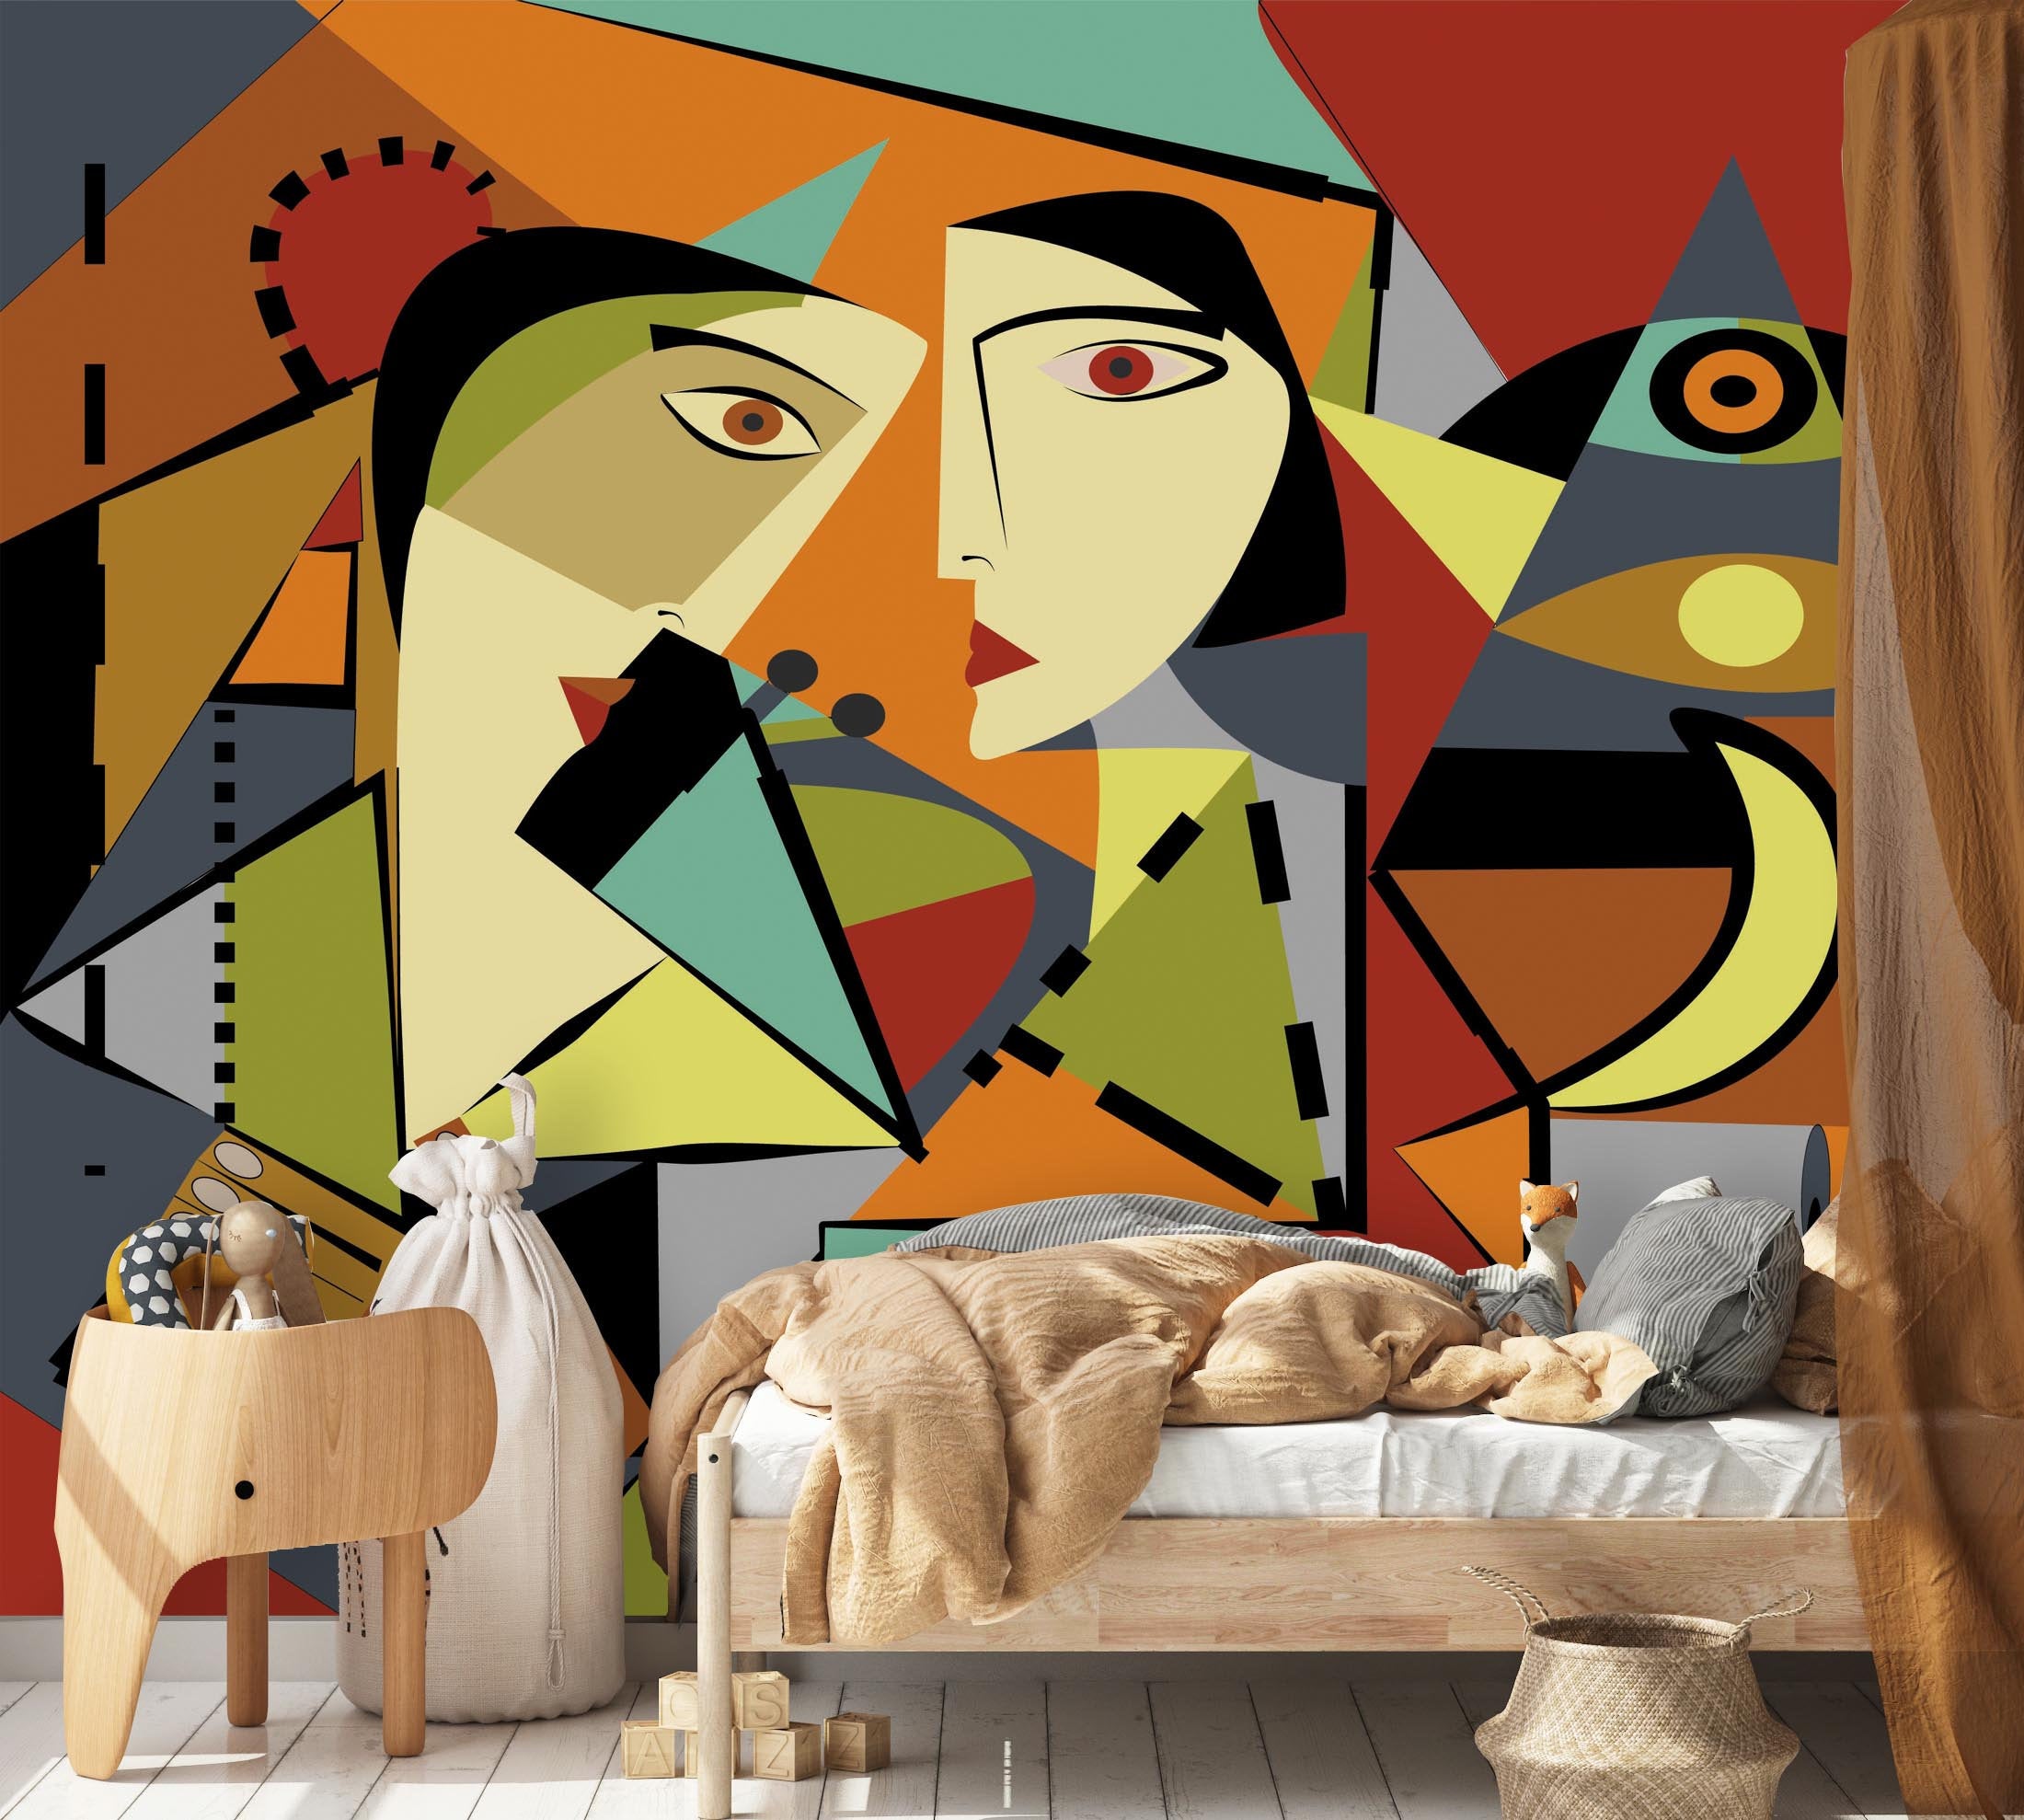 Cubism Art Style Abstract Portrait Two Girls Wallpaper Self Adhesive Peel and Stick Wall Sticker Wall Decoration Removable